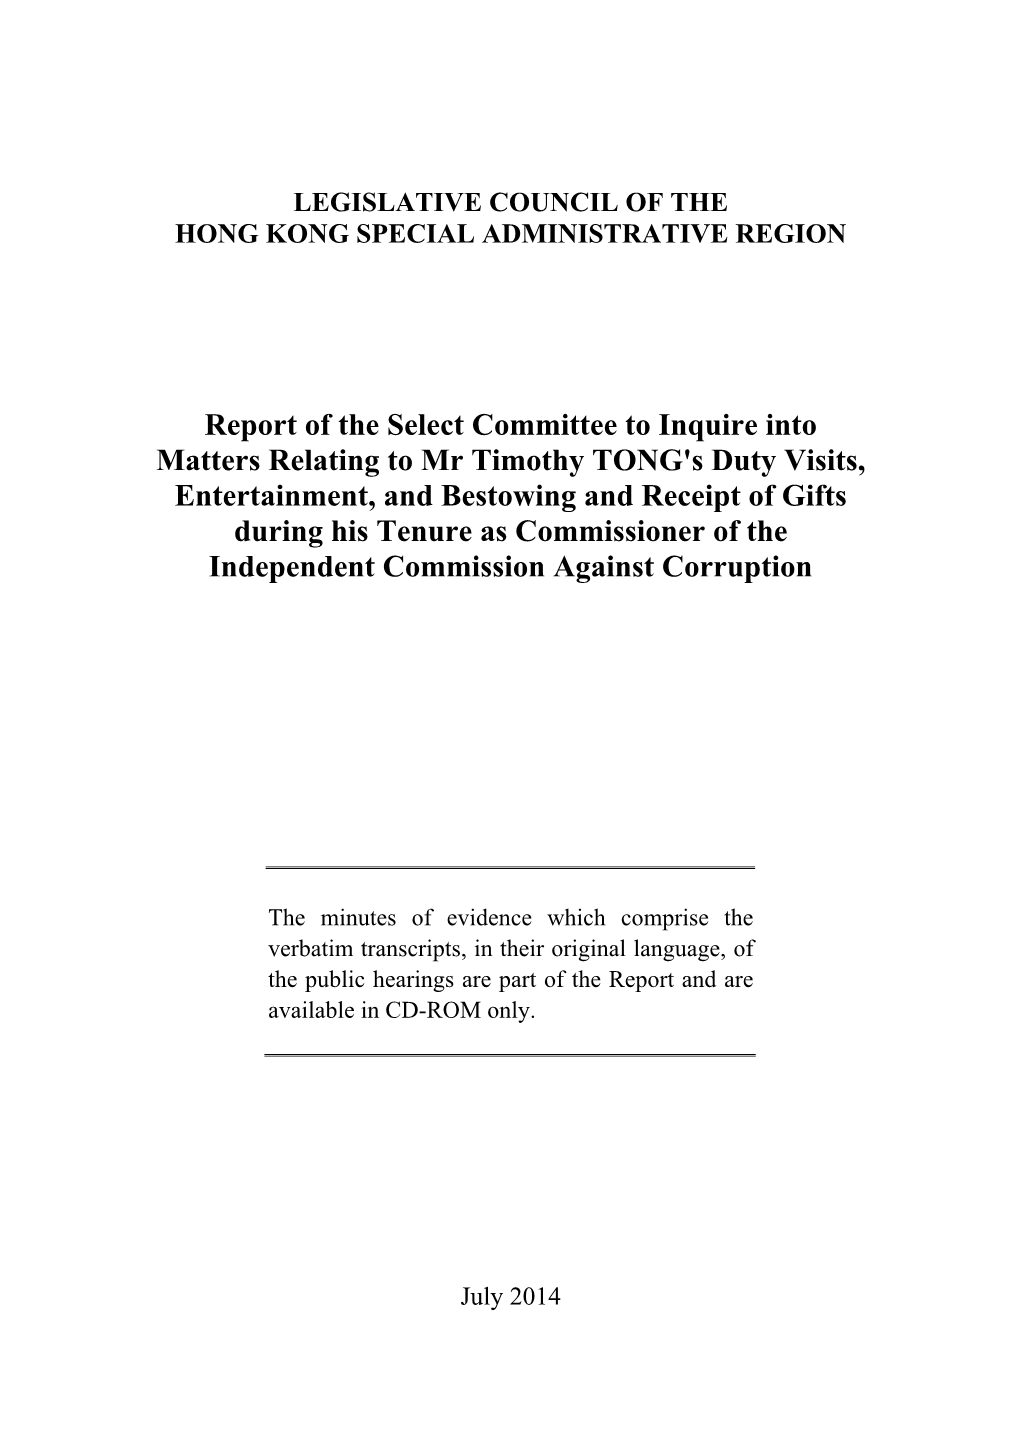 Report of the Select Committee to Inquire Into Matters Relating to Mr Timothy TONG's Duty Visits, Entertainment, and Bestowing